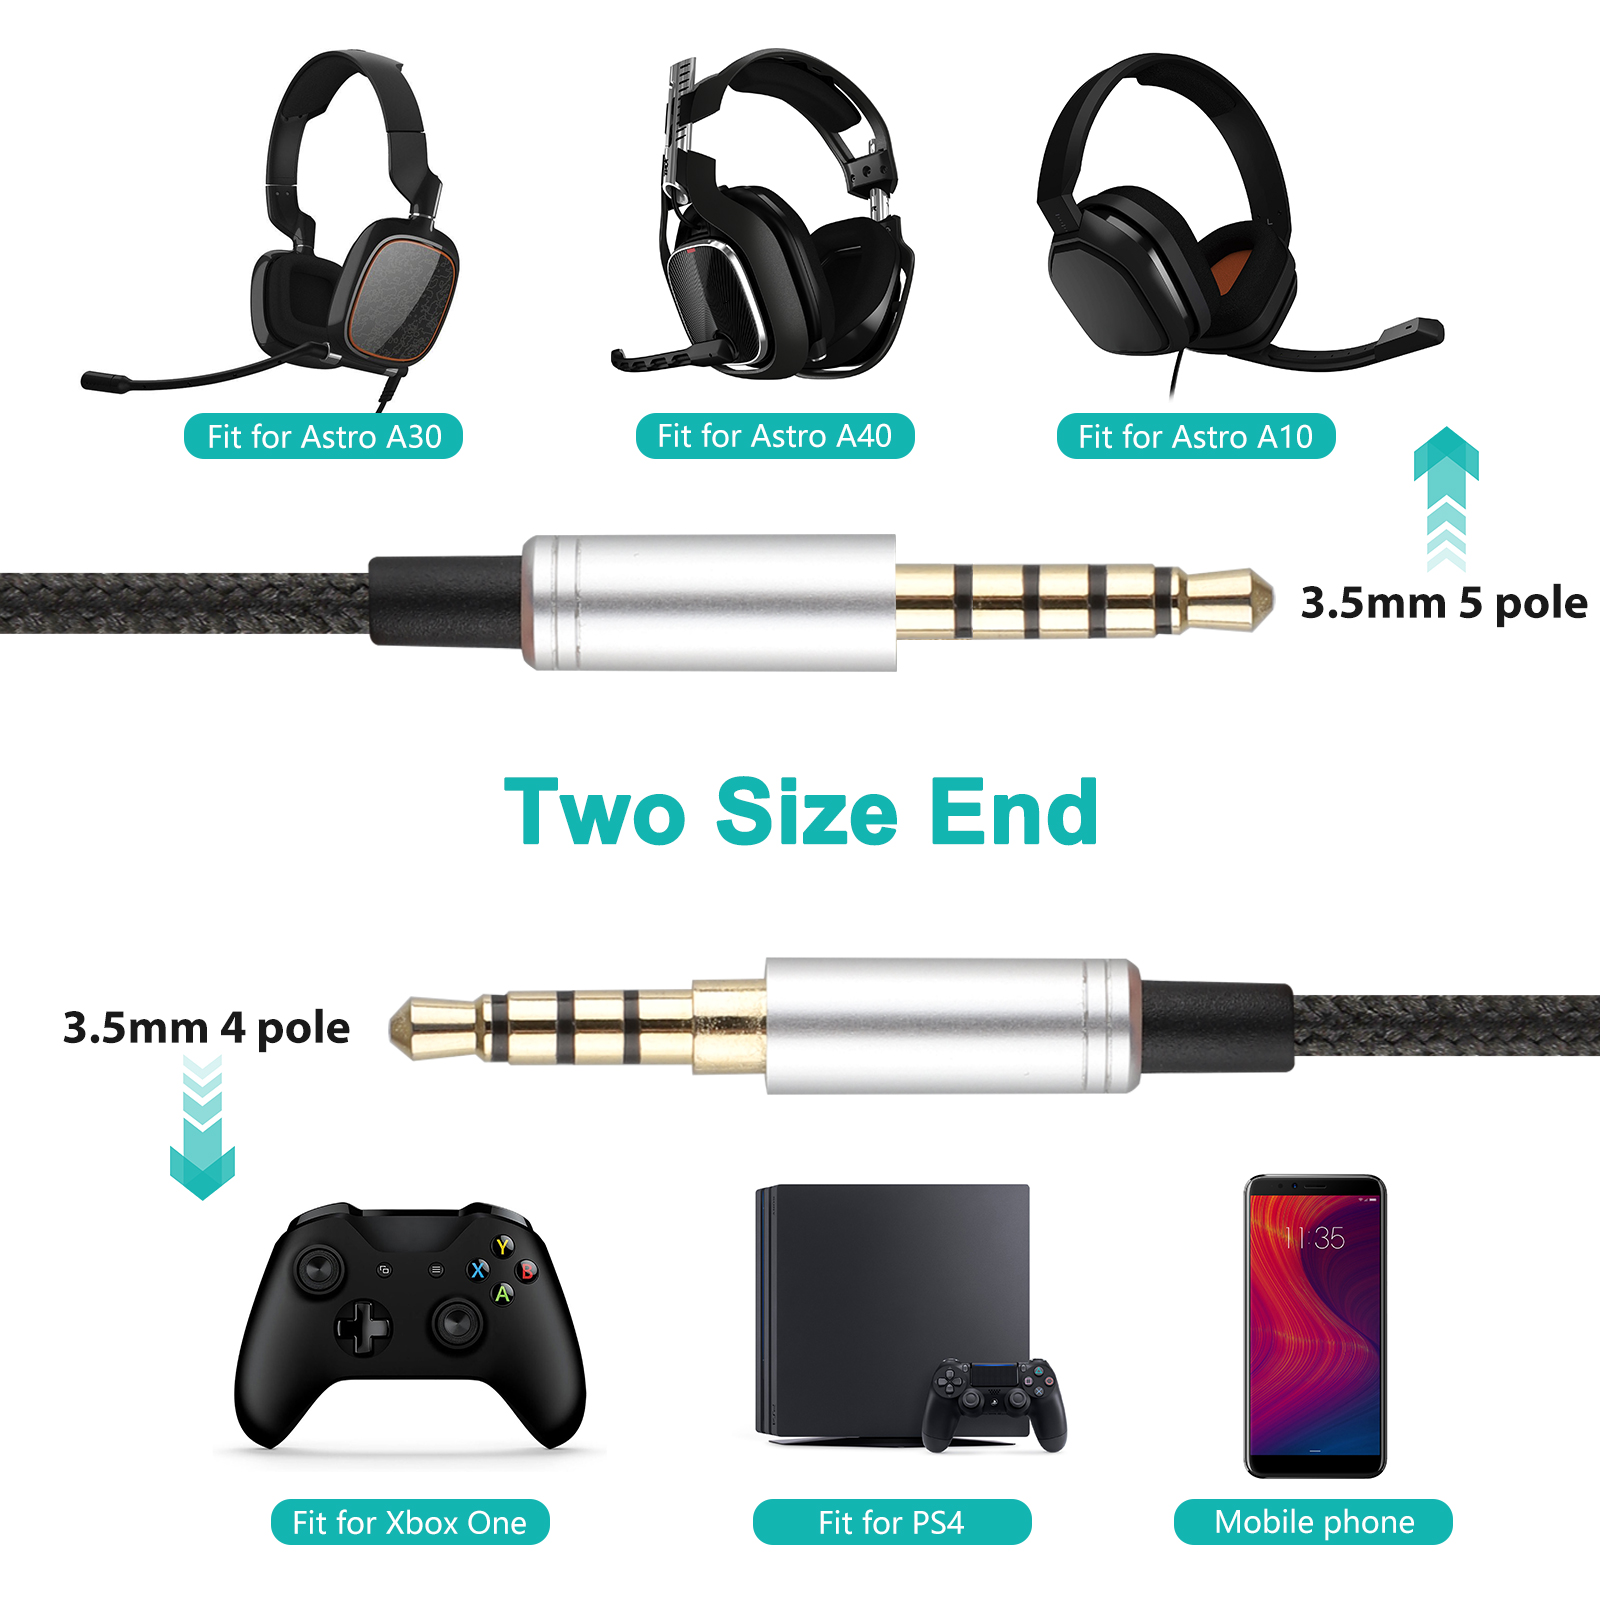 For Astro A10 0 Gaming Headset Replacement Audio Cable Cord 2m 3 5mm Ebay